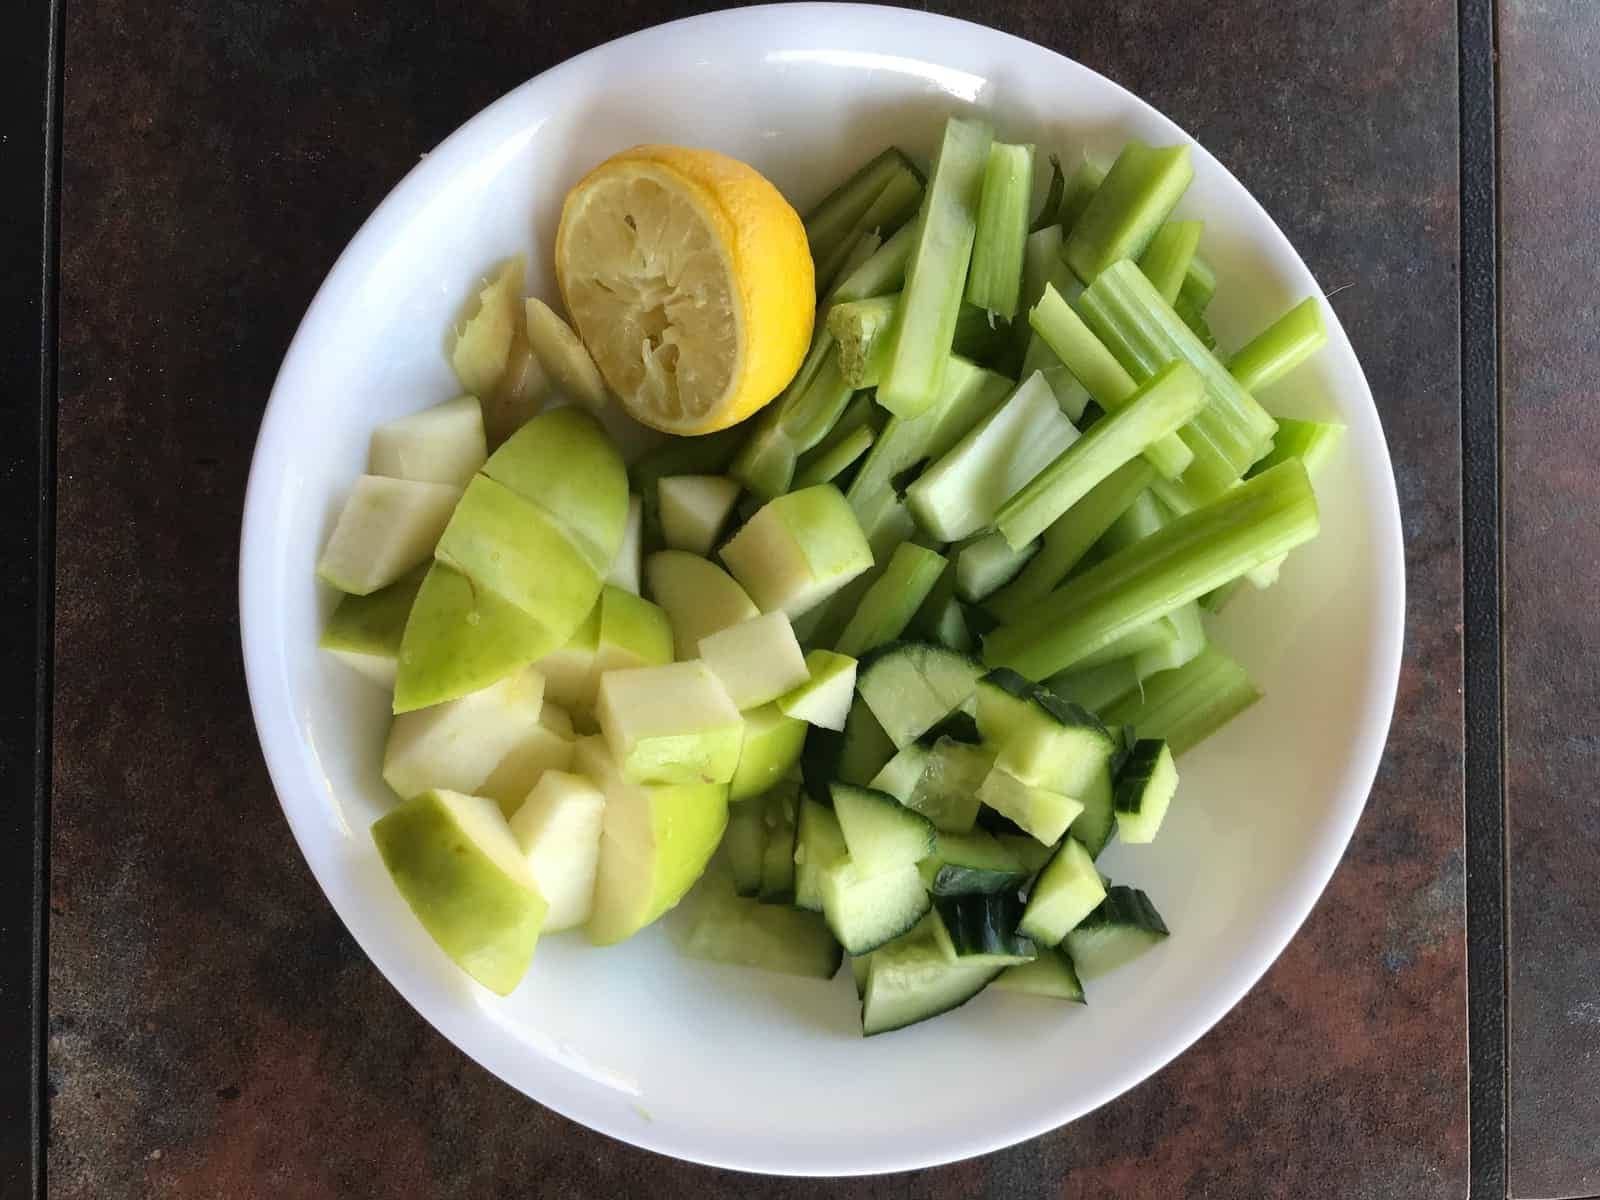 celery, cuucmber, apple, ginger and lemon arranged in a white plate